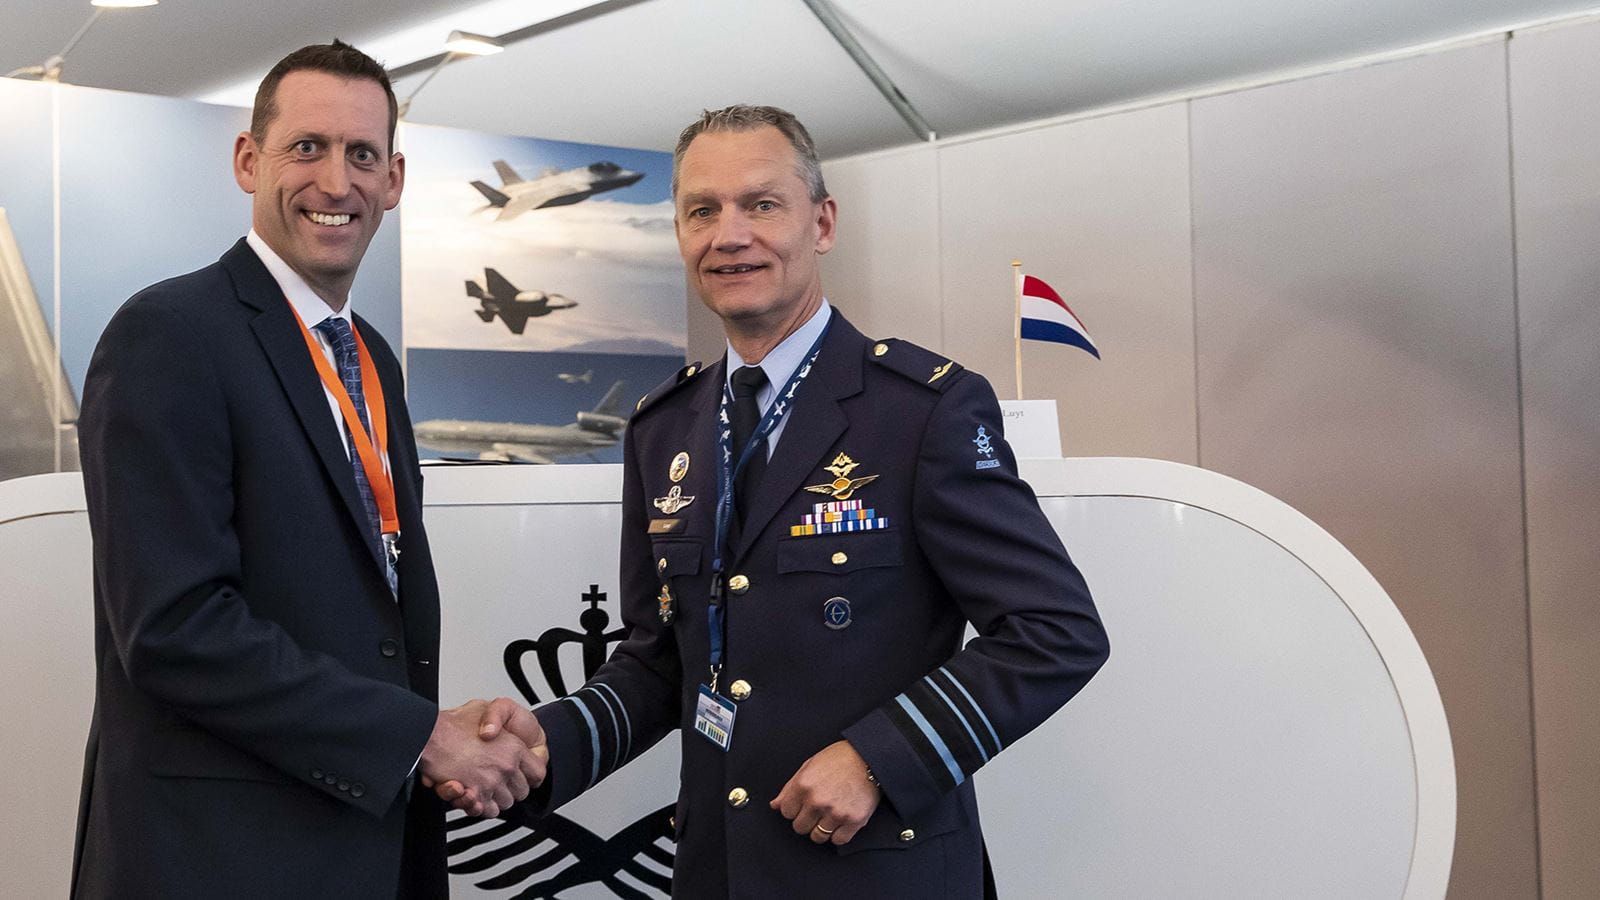 Craig Bries, vice president and general manager, Collins Aerospace shakes hands with Lt. Gen. J.D. Luyt, Commander of the Royal Netherlands Air Force